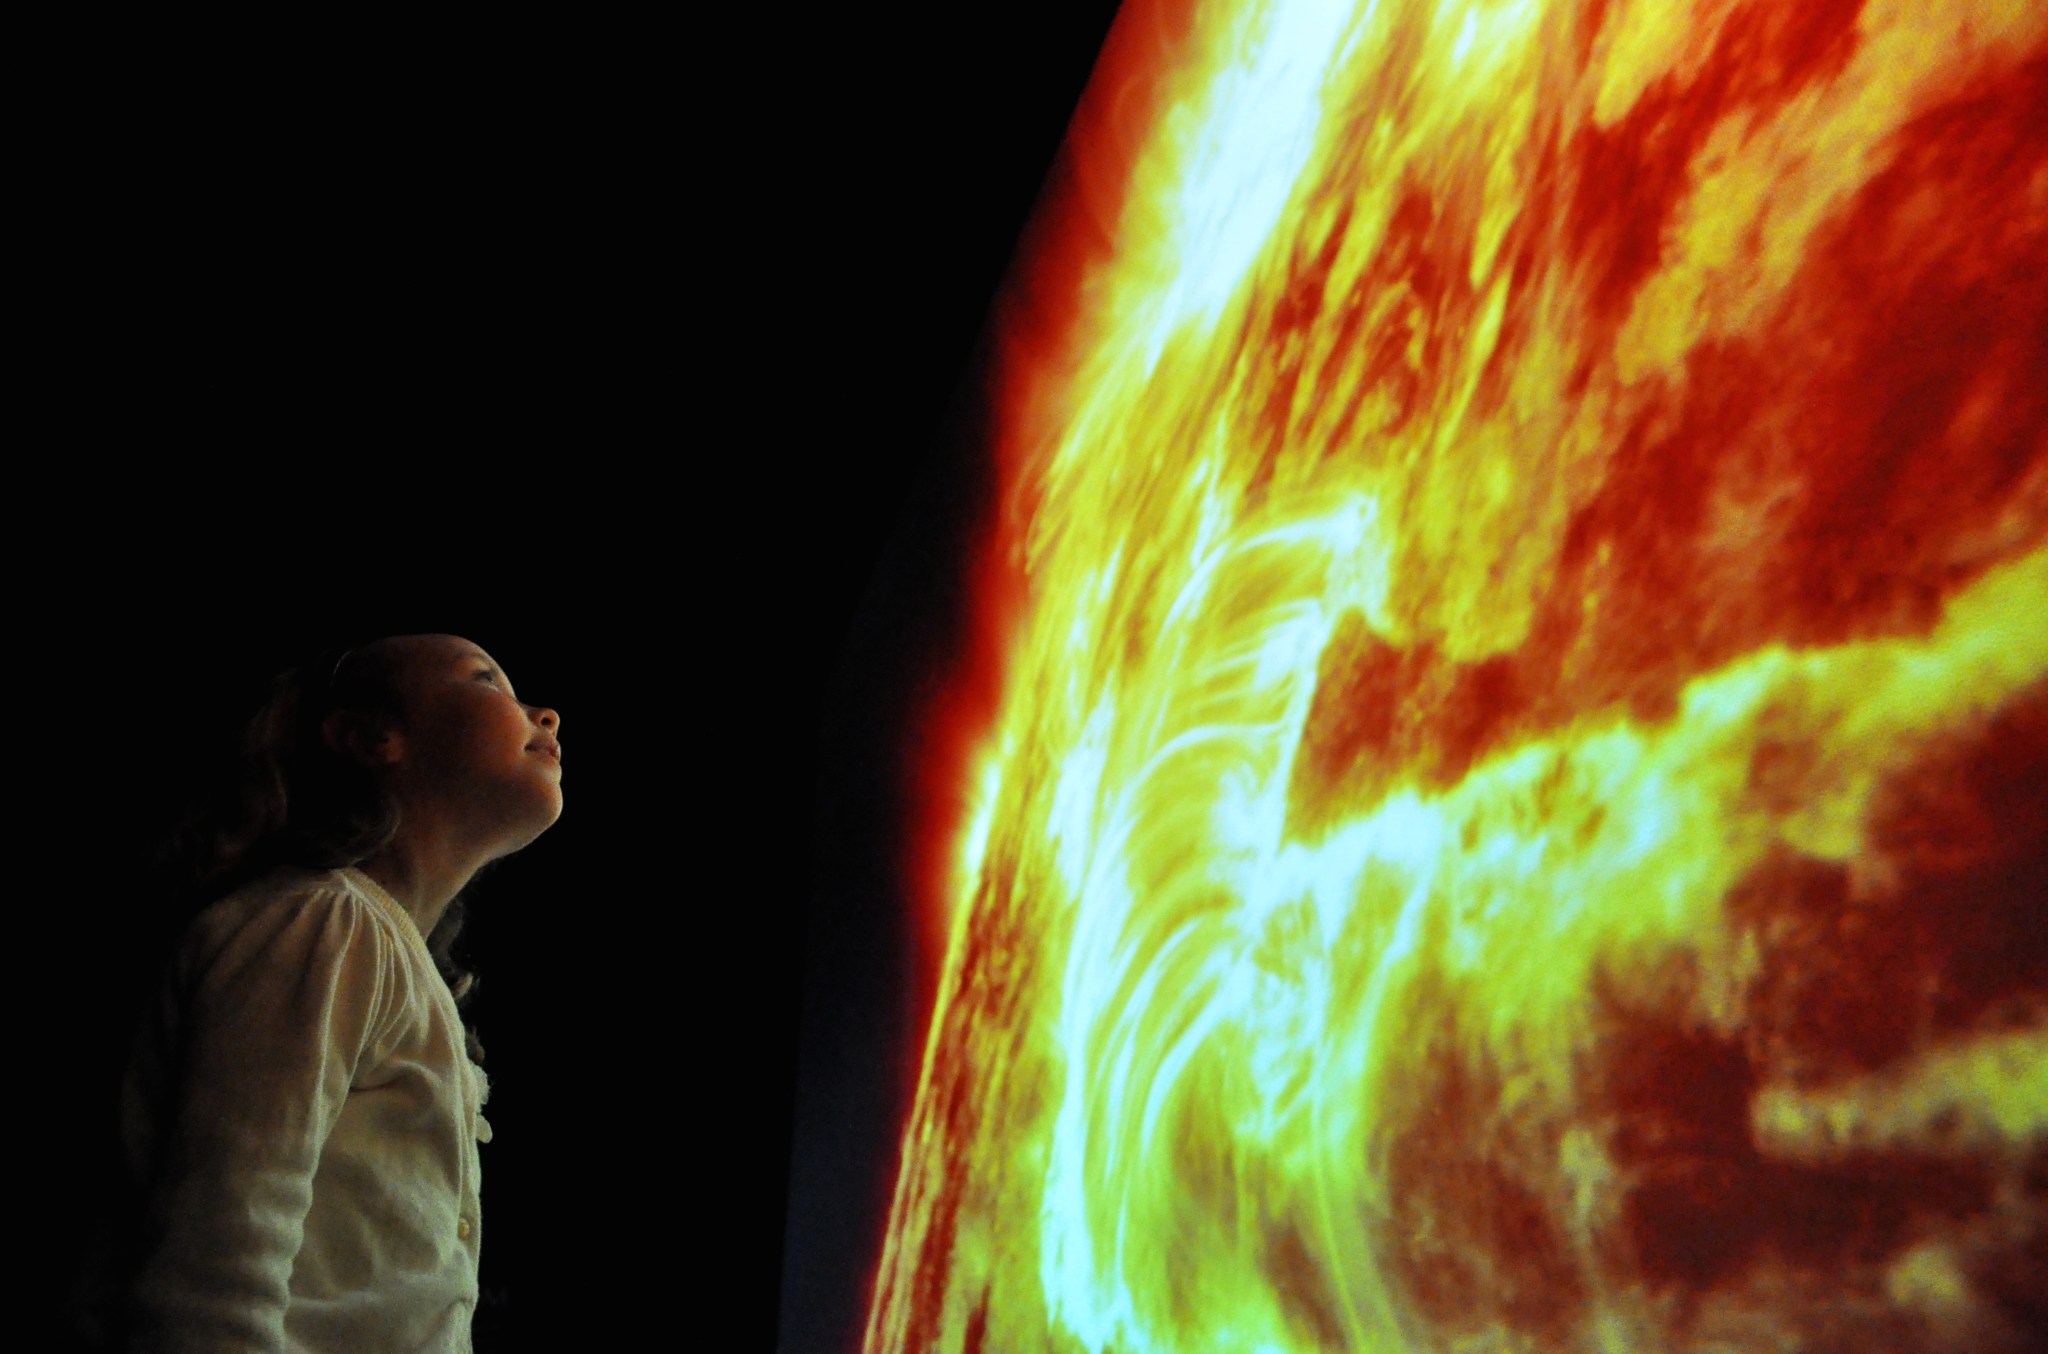 A young girl stands in front of a huge, glowing image of the Sun, appearing as a massive red and yellow swirling surface covering the whole right side of the image. The room is completely dark except for the light shining off the screen, illuminating the girl's face in bright contrasts. She wears a white sweater and looks upward at the Sun.